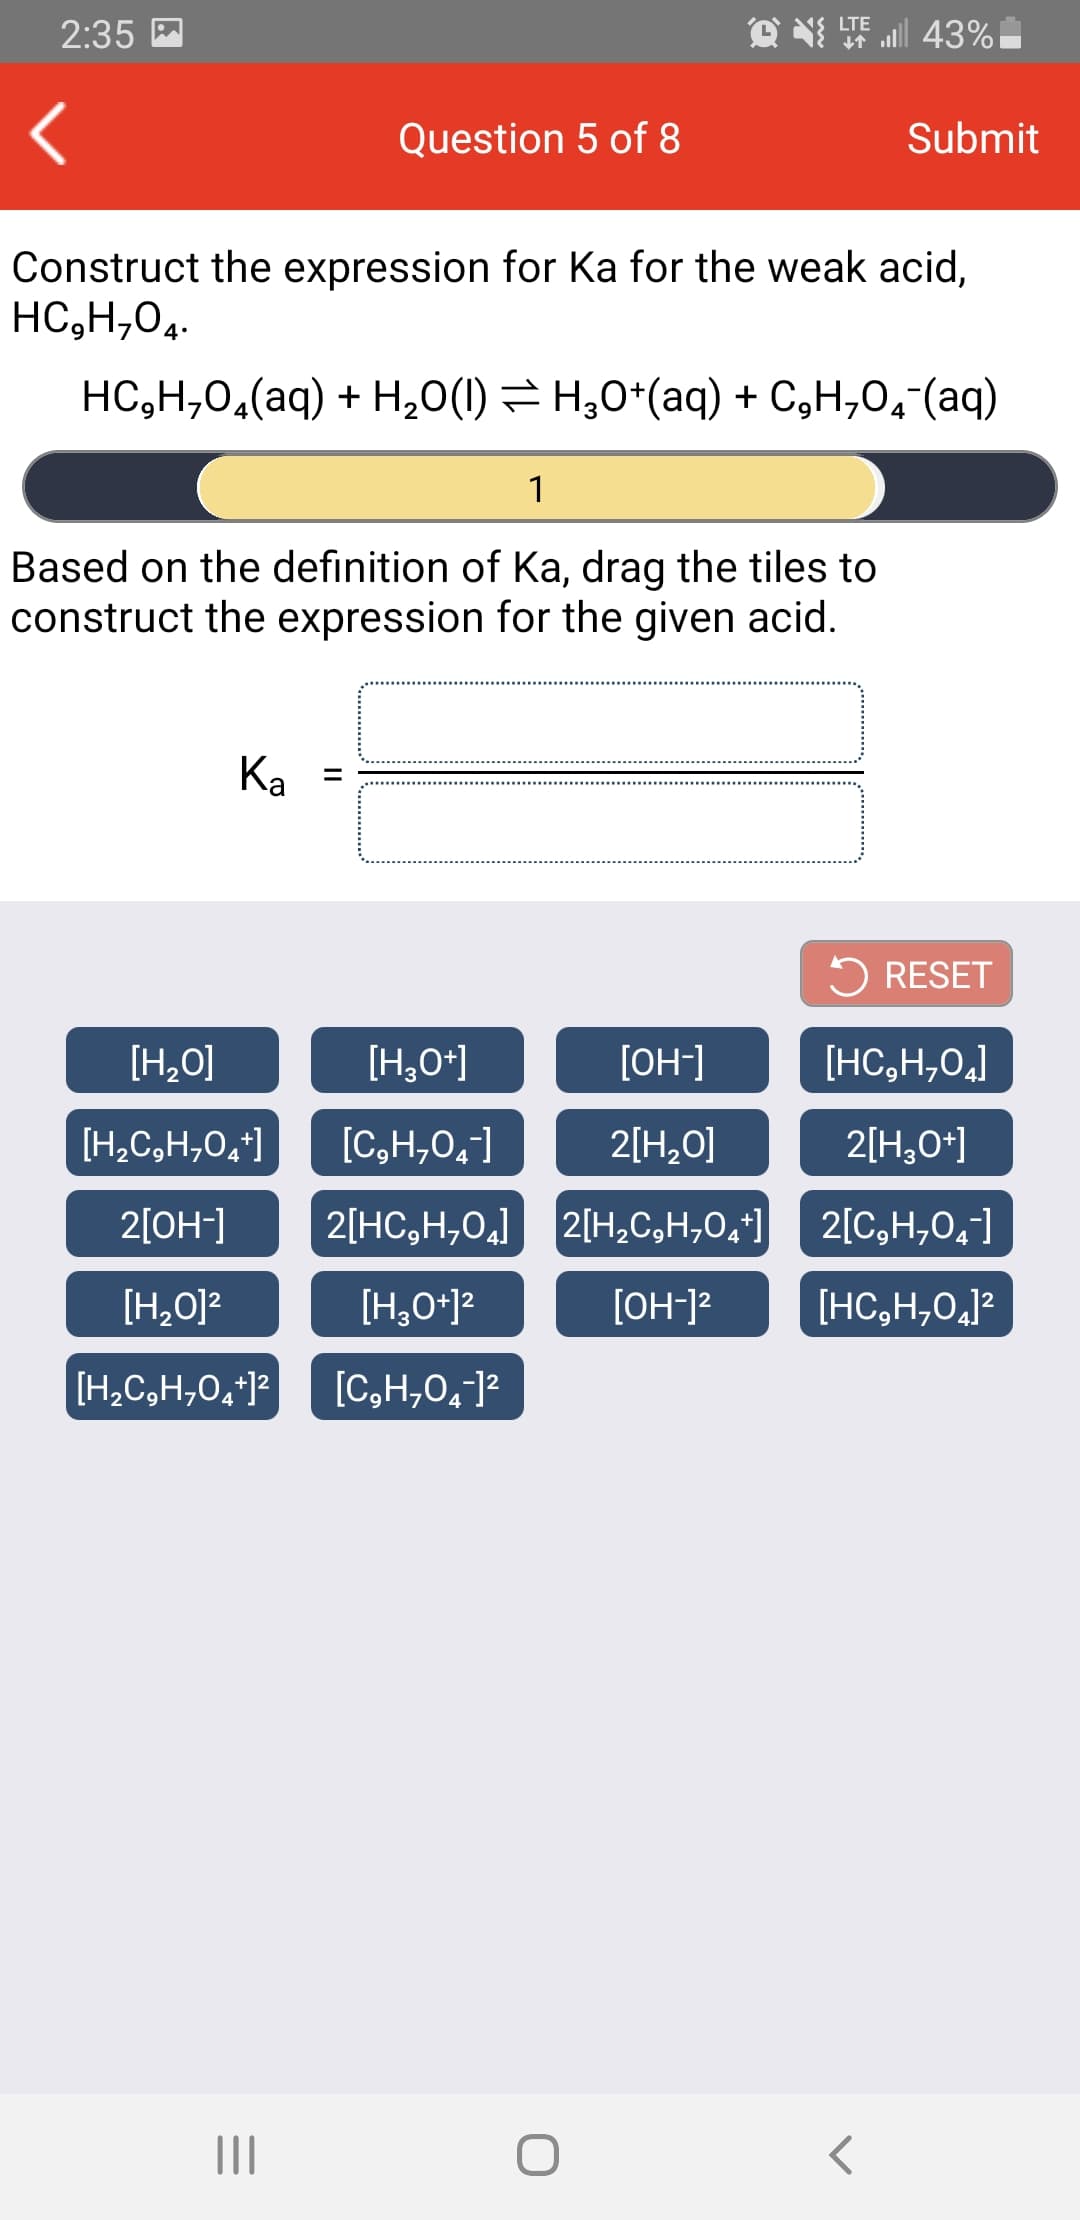 O N T 43%
LTE
2:35 M
Question 5 of 8
Submit
Construct the expression for Ka for the weak acid,
HC,H,04.
HC,H,0,(aq) + H,0(1) = H,0*(aq) + C,H,0,"(aq)
1
Based on the definition of Ka, drag the tiles to
construct the expression for the given acid.
Ka
%3D
5 RESET
[H,O]
[H,0*]
[OH-]
[HC,H,0,]
[H,C,H,0,*]
[C,H,0,]
2[H,0O]
2[H,0*]
2[OH-]
2[HC,H,0,] 2[H,C,H,0,*]
2[C,H,0,]
[H,0]2
[H,0*]?
[OH-]?
[HC,H,0,]?
[H,C,H,0,*]?
[C,H,0,]?
II
